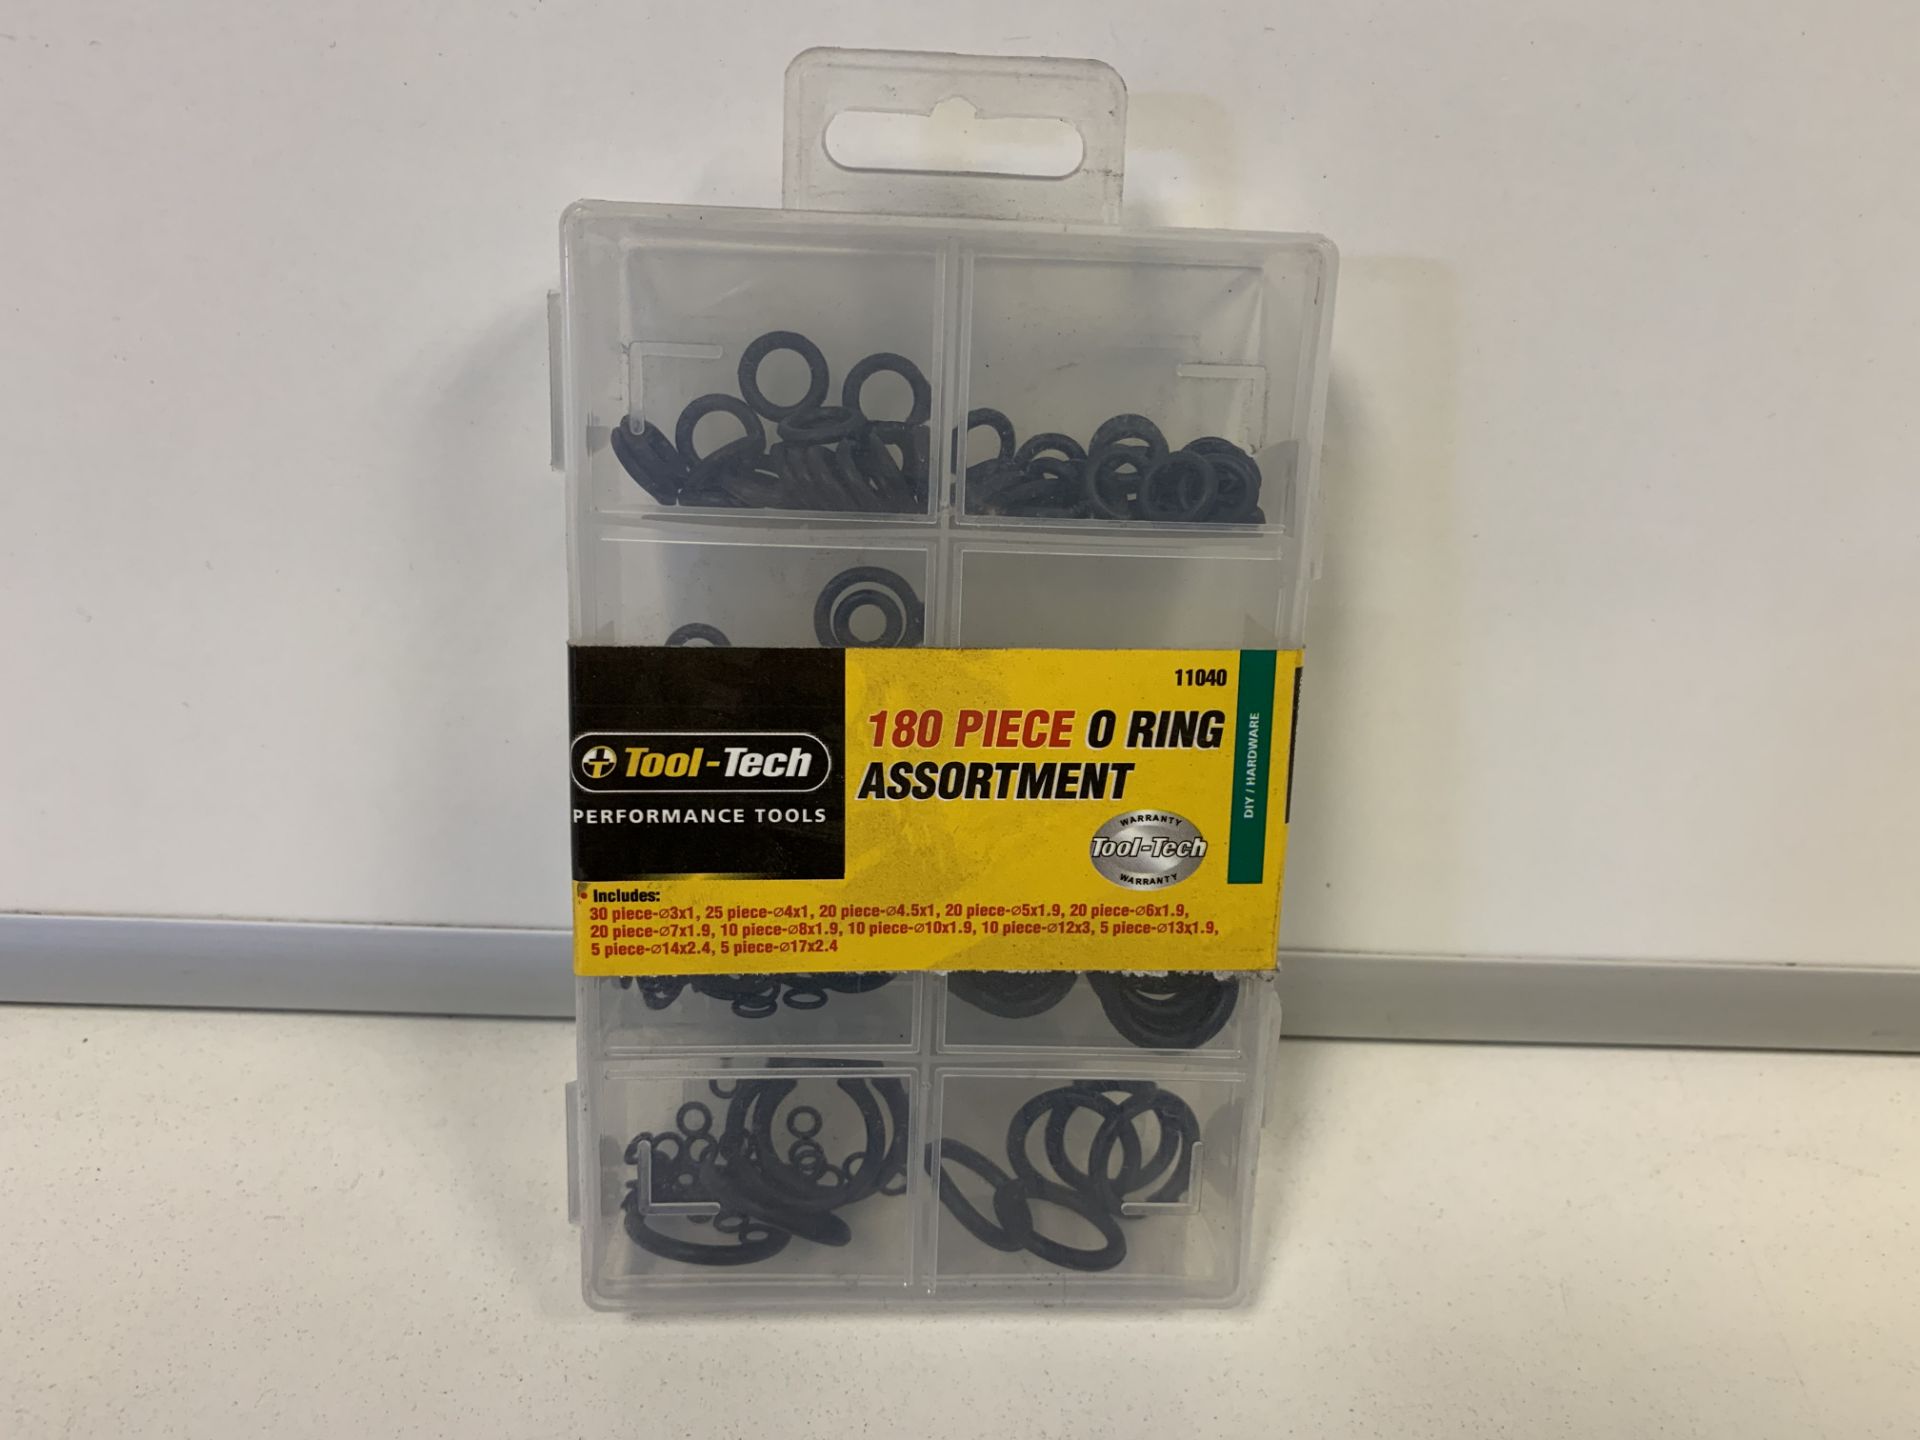 72 X TOOL TECH 180 PIECE O RING ASSORTMENT IN 2 BOXES